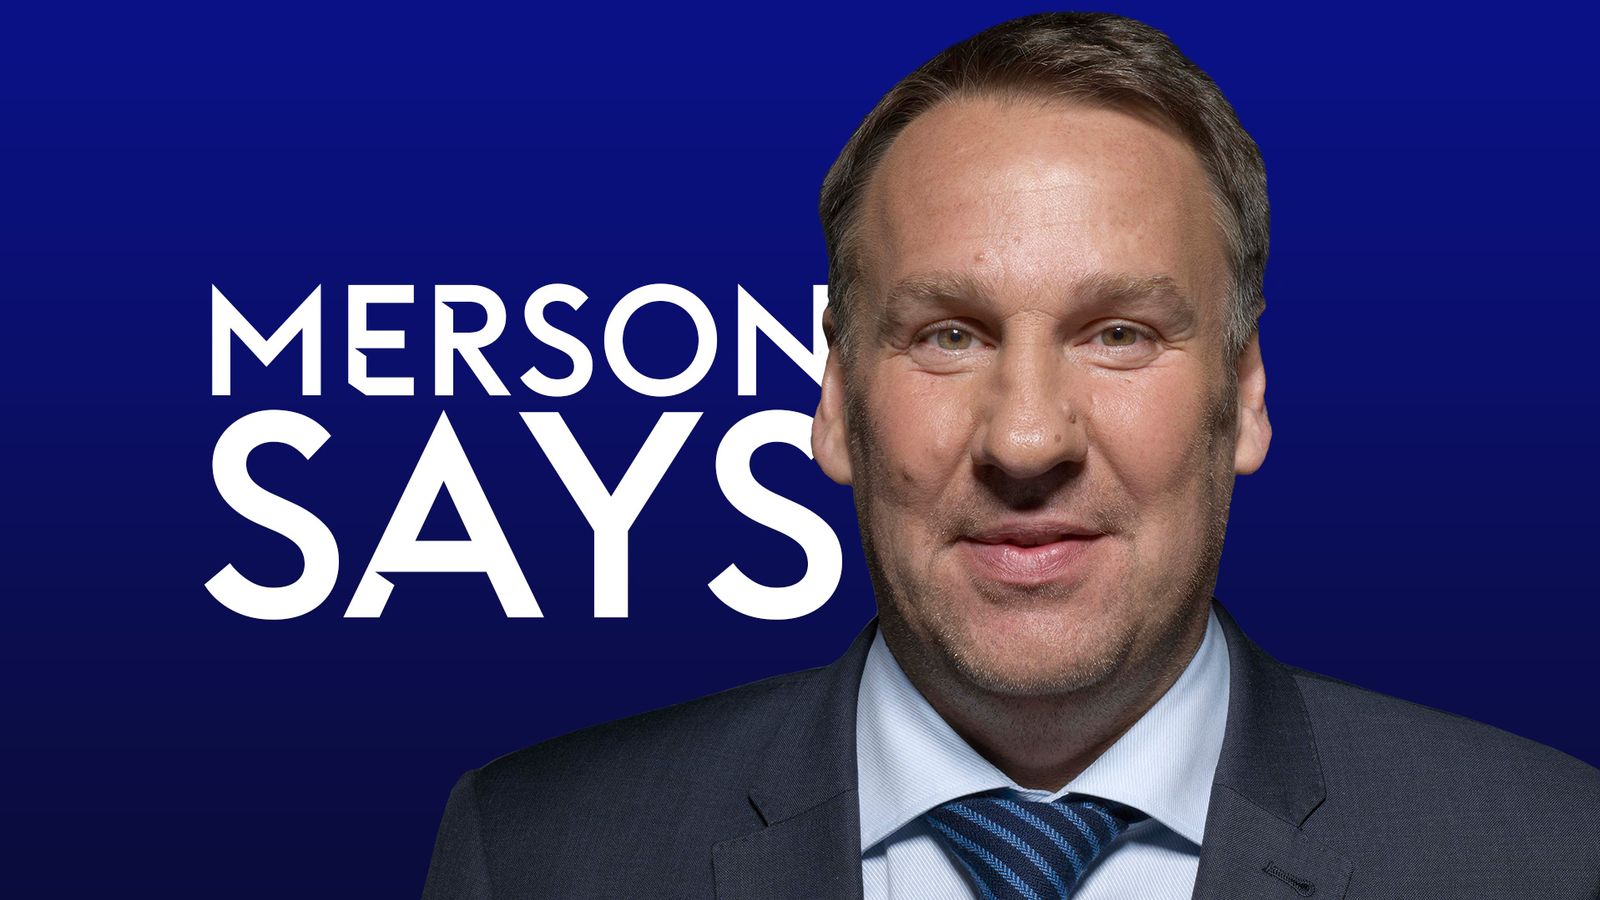 brendan-rodgers-should-be-chelsea-s-next-manager-not-julian-nagelsmann-says-paul-merson-or-football-news